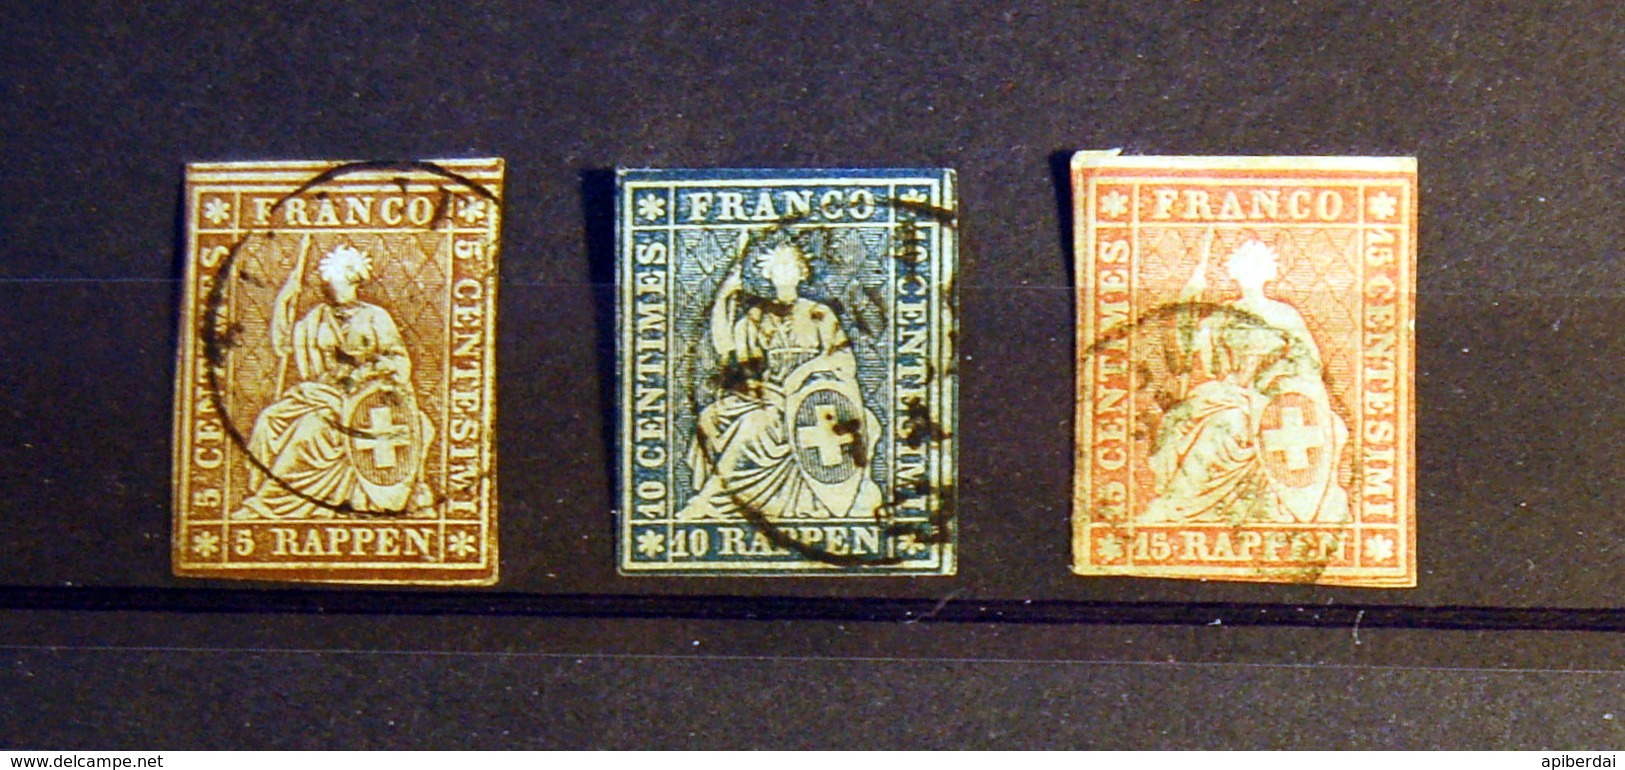 Suisse - 1854/62 Helvetia Assise Imperforate Zumstein No 22,23,24 (used) - Used Stamps